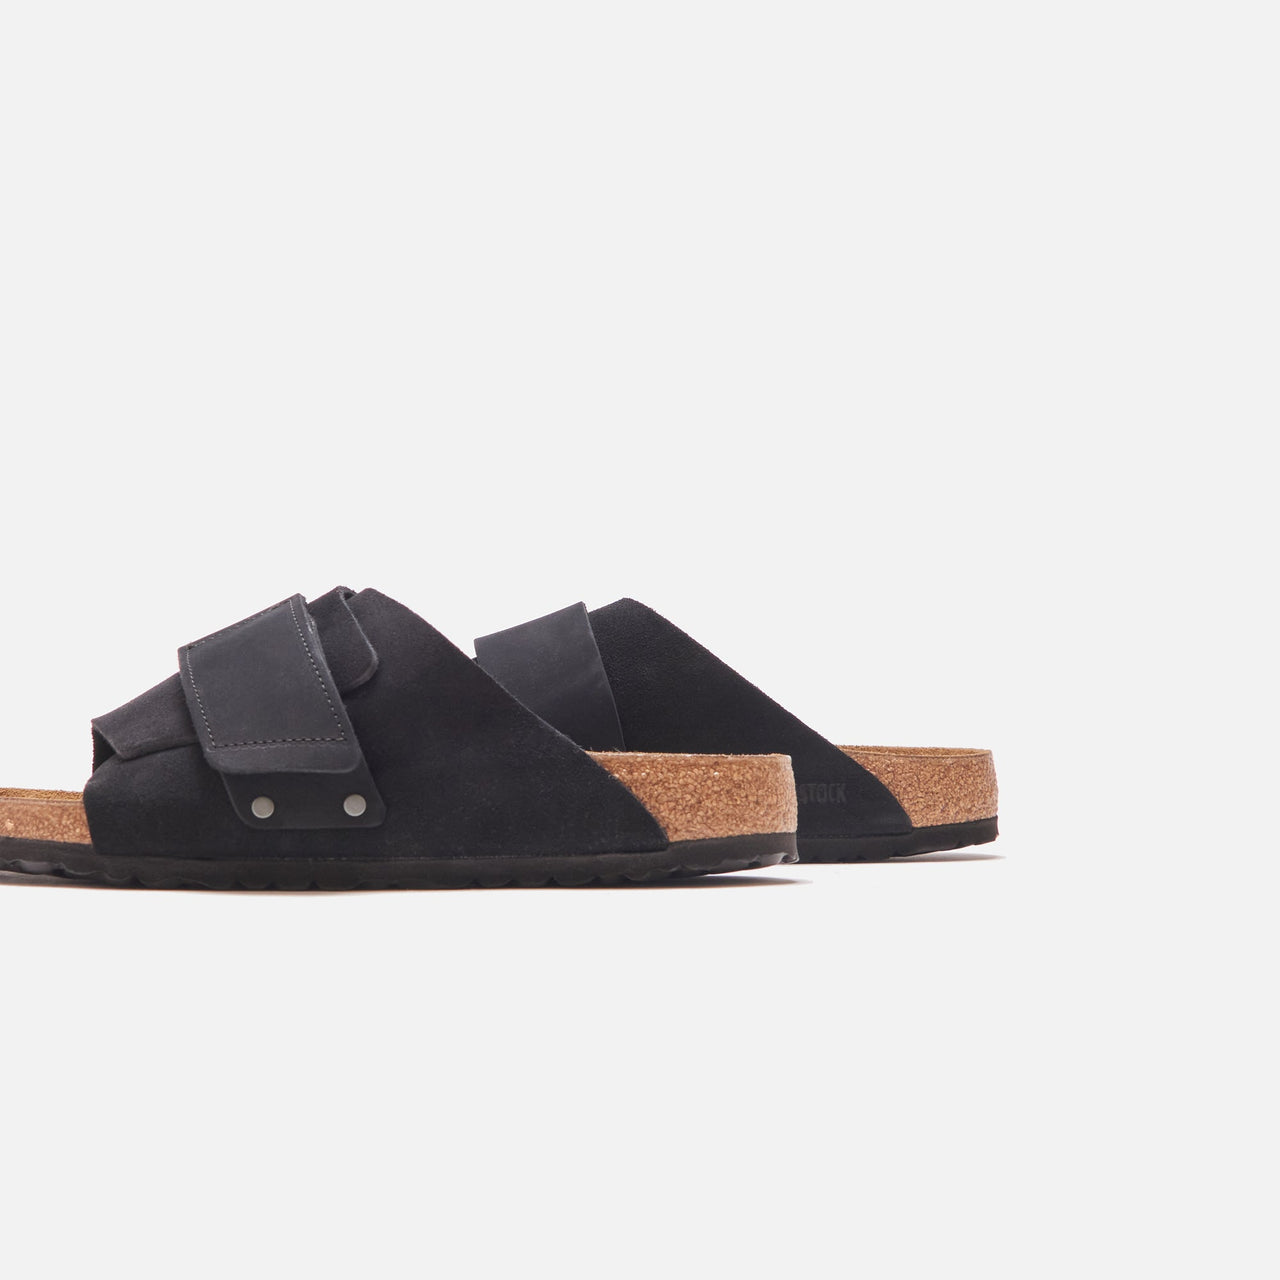 Close-up of Birkenstock Kyoto Suede Black sandal with soft suede material